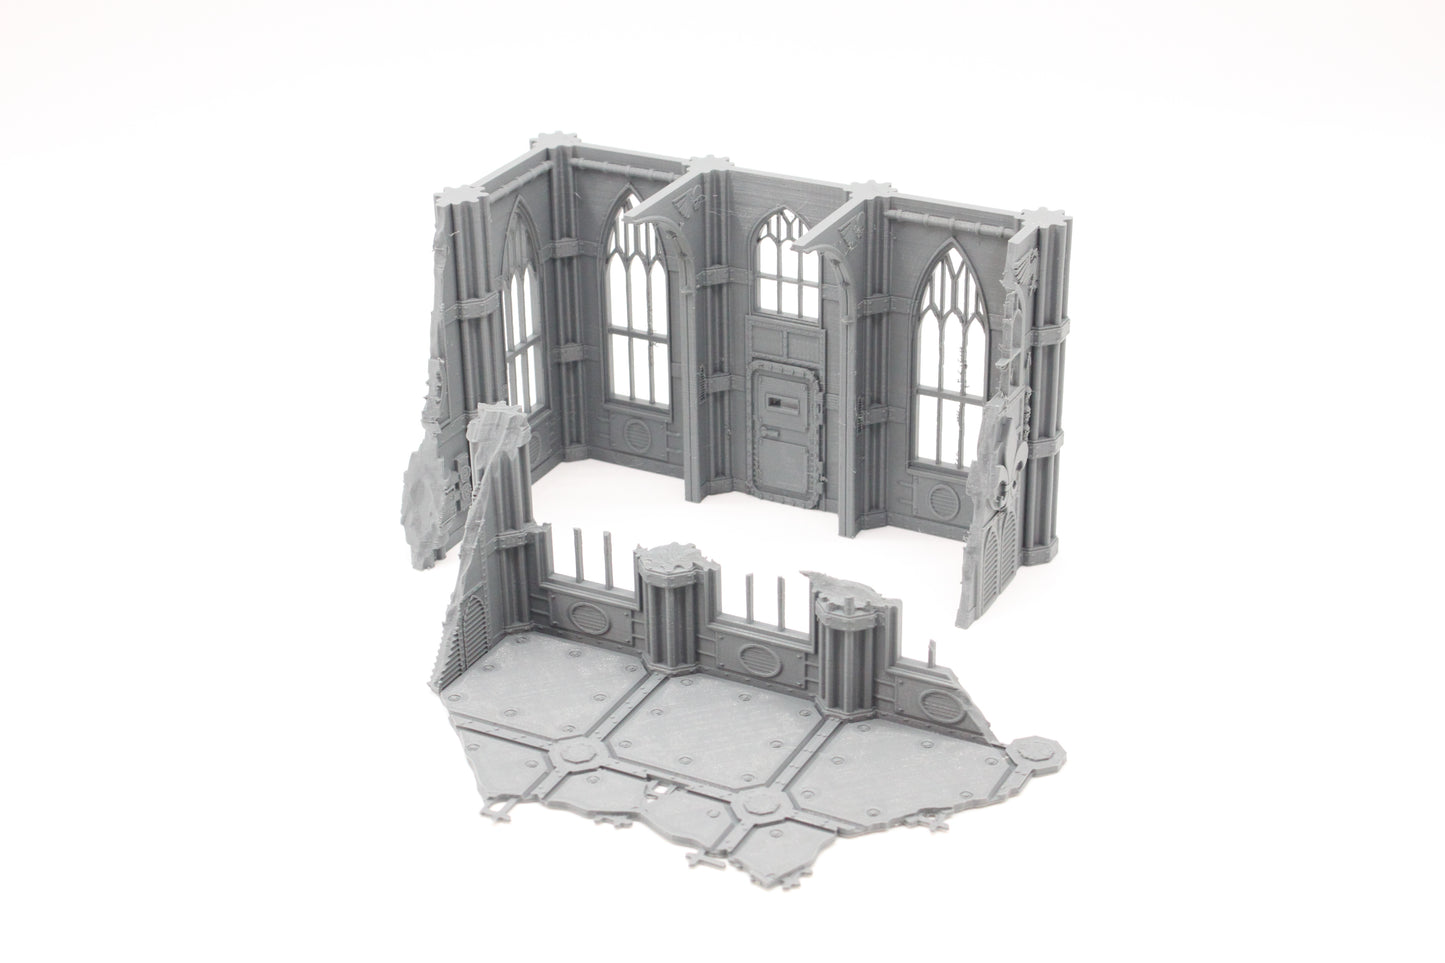 Detailed C Shaped Two Level Gothic Ruined Building